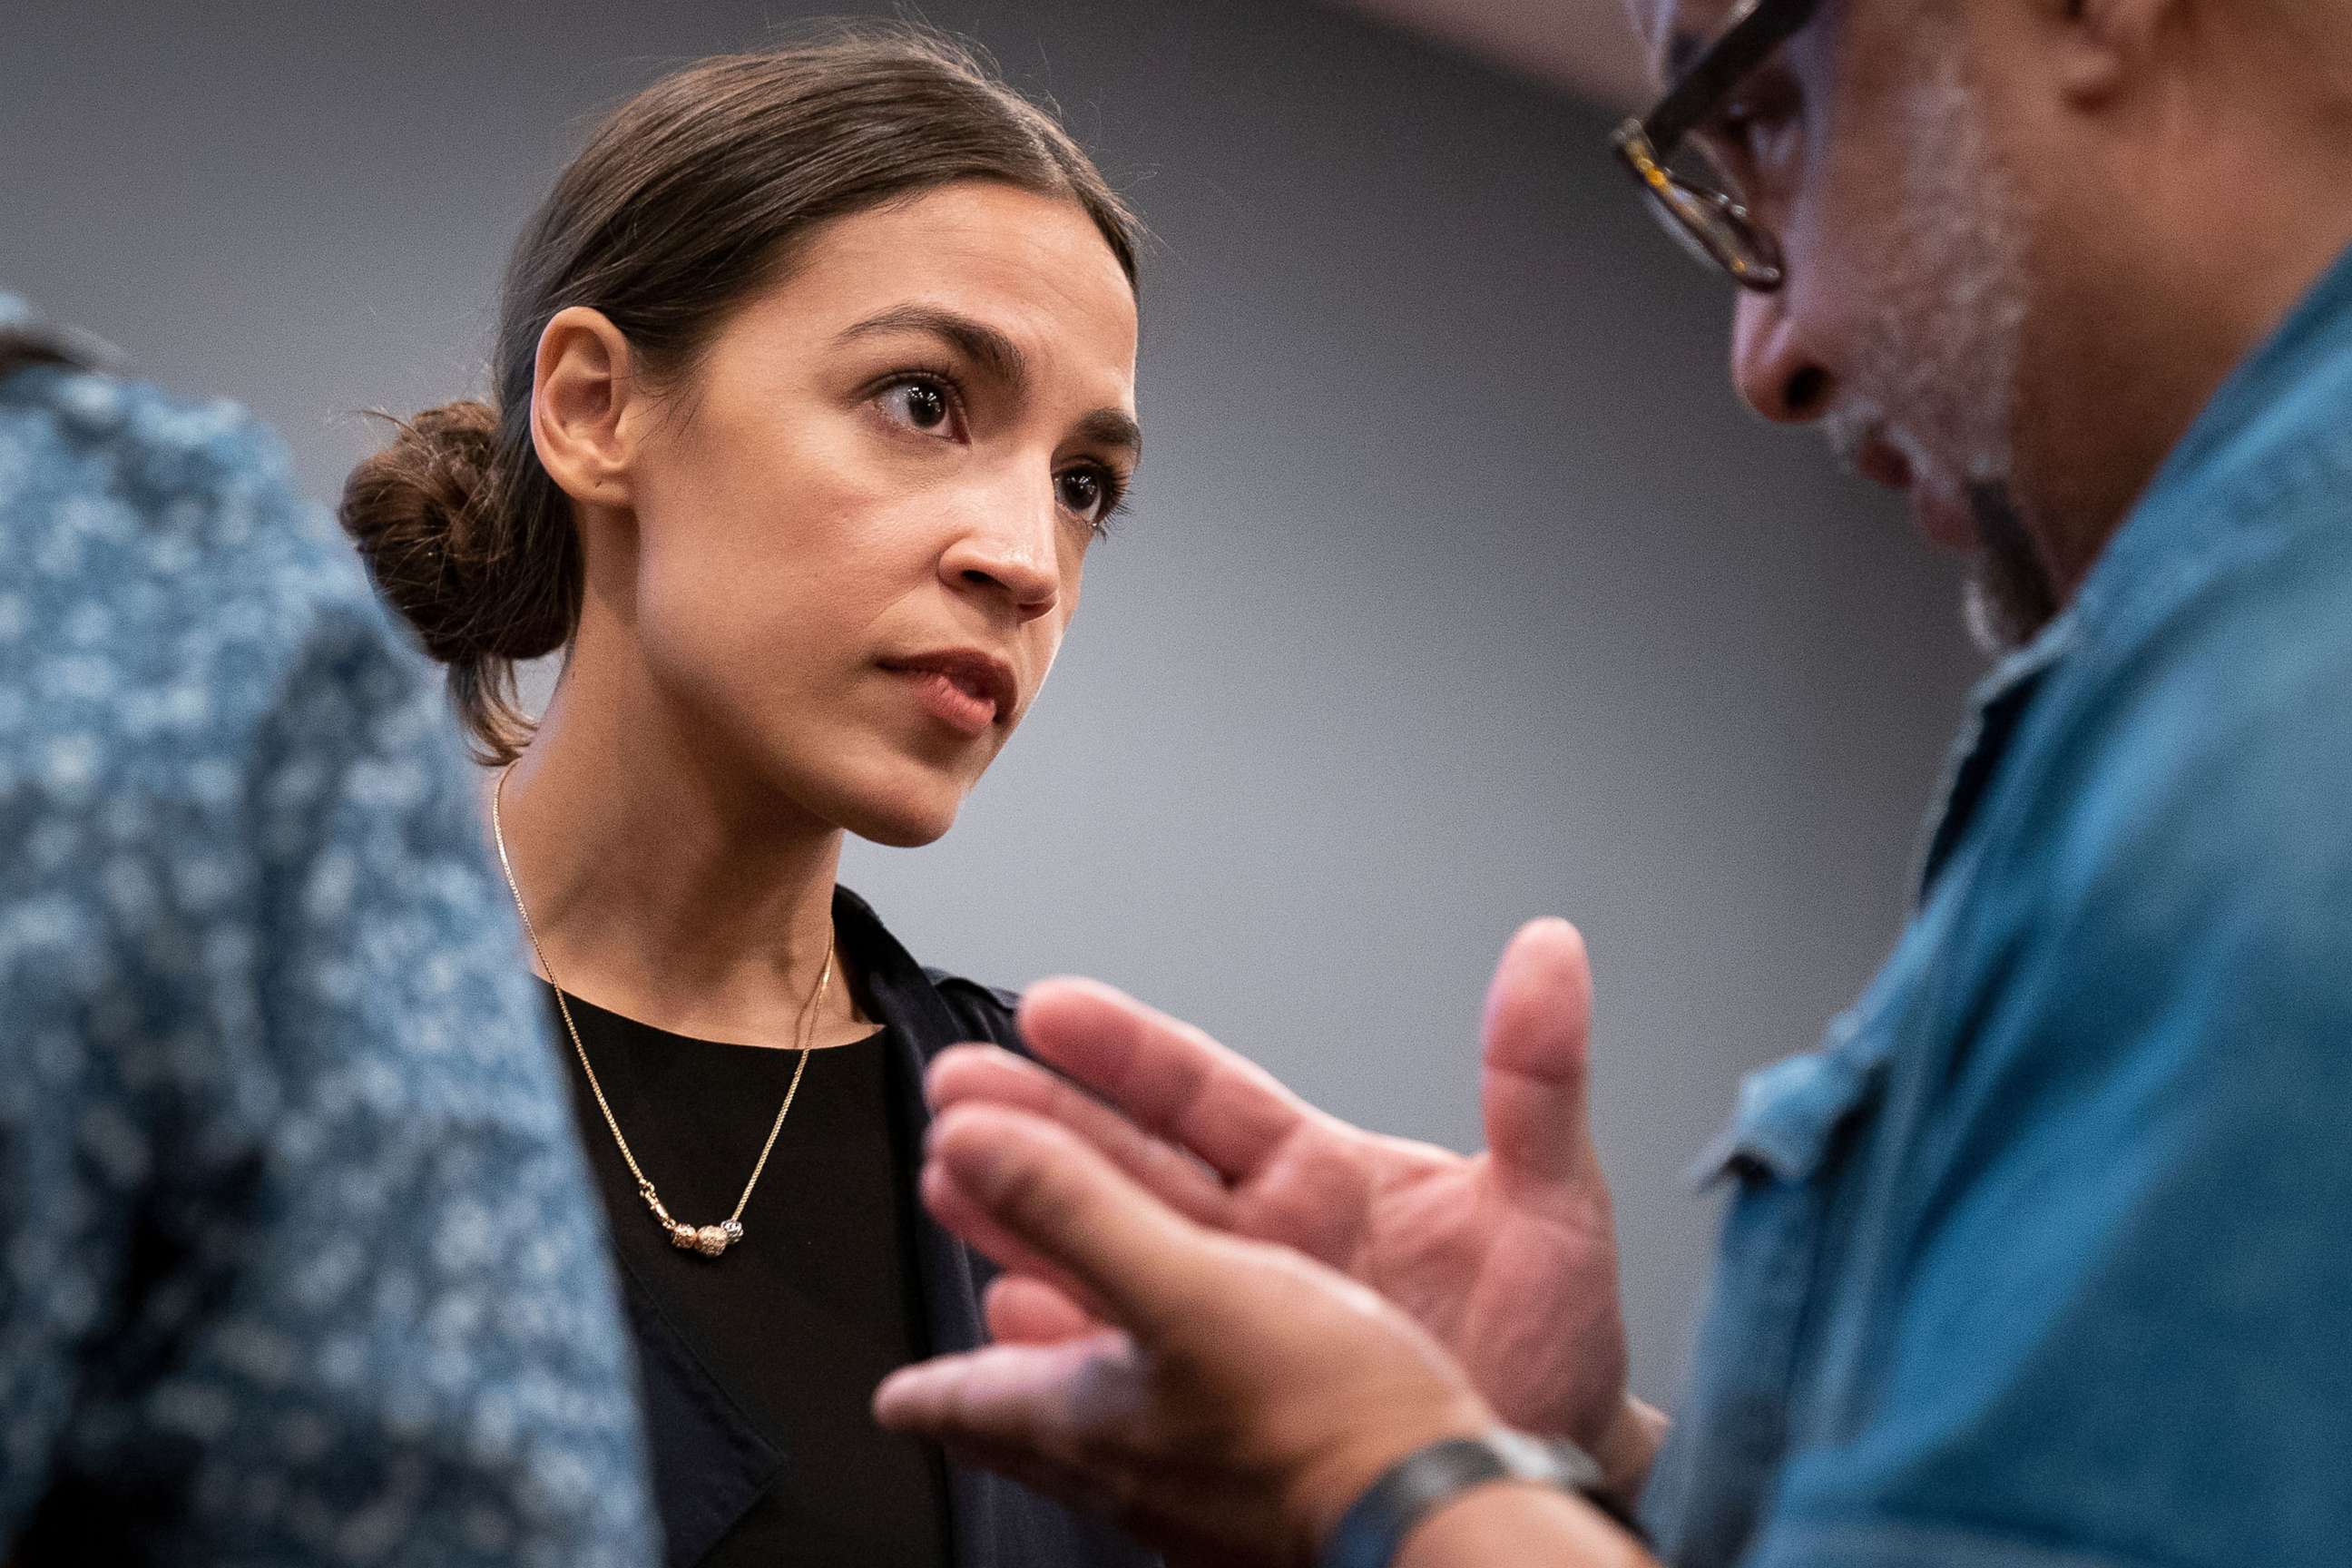 PHOTO: Alexandria Ocasio-Cortez, Democratic candidate running for New York's 14th Congressional district, talks with a voter at the conclusion of a town hall event, Sept. 19, 2018 in The Bronx borough of New York.